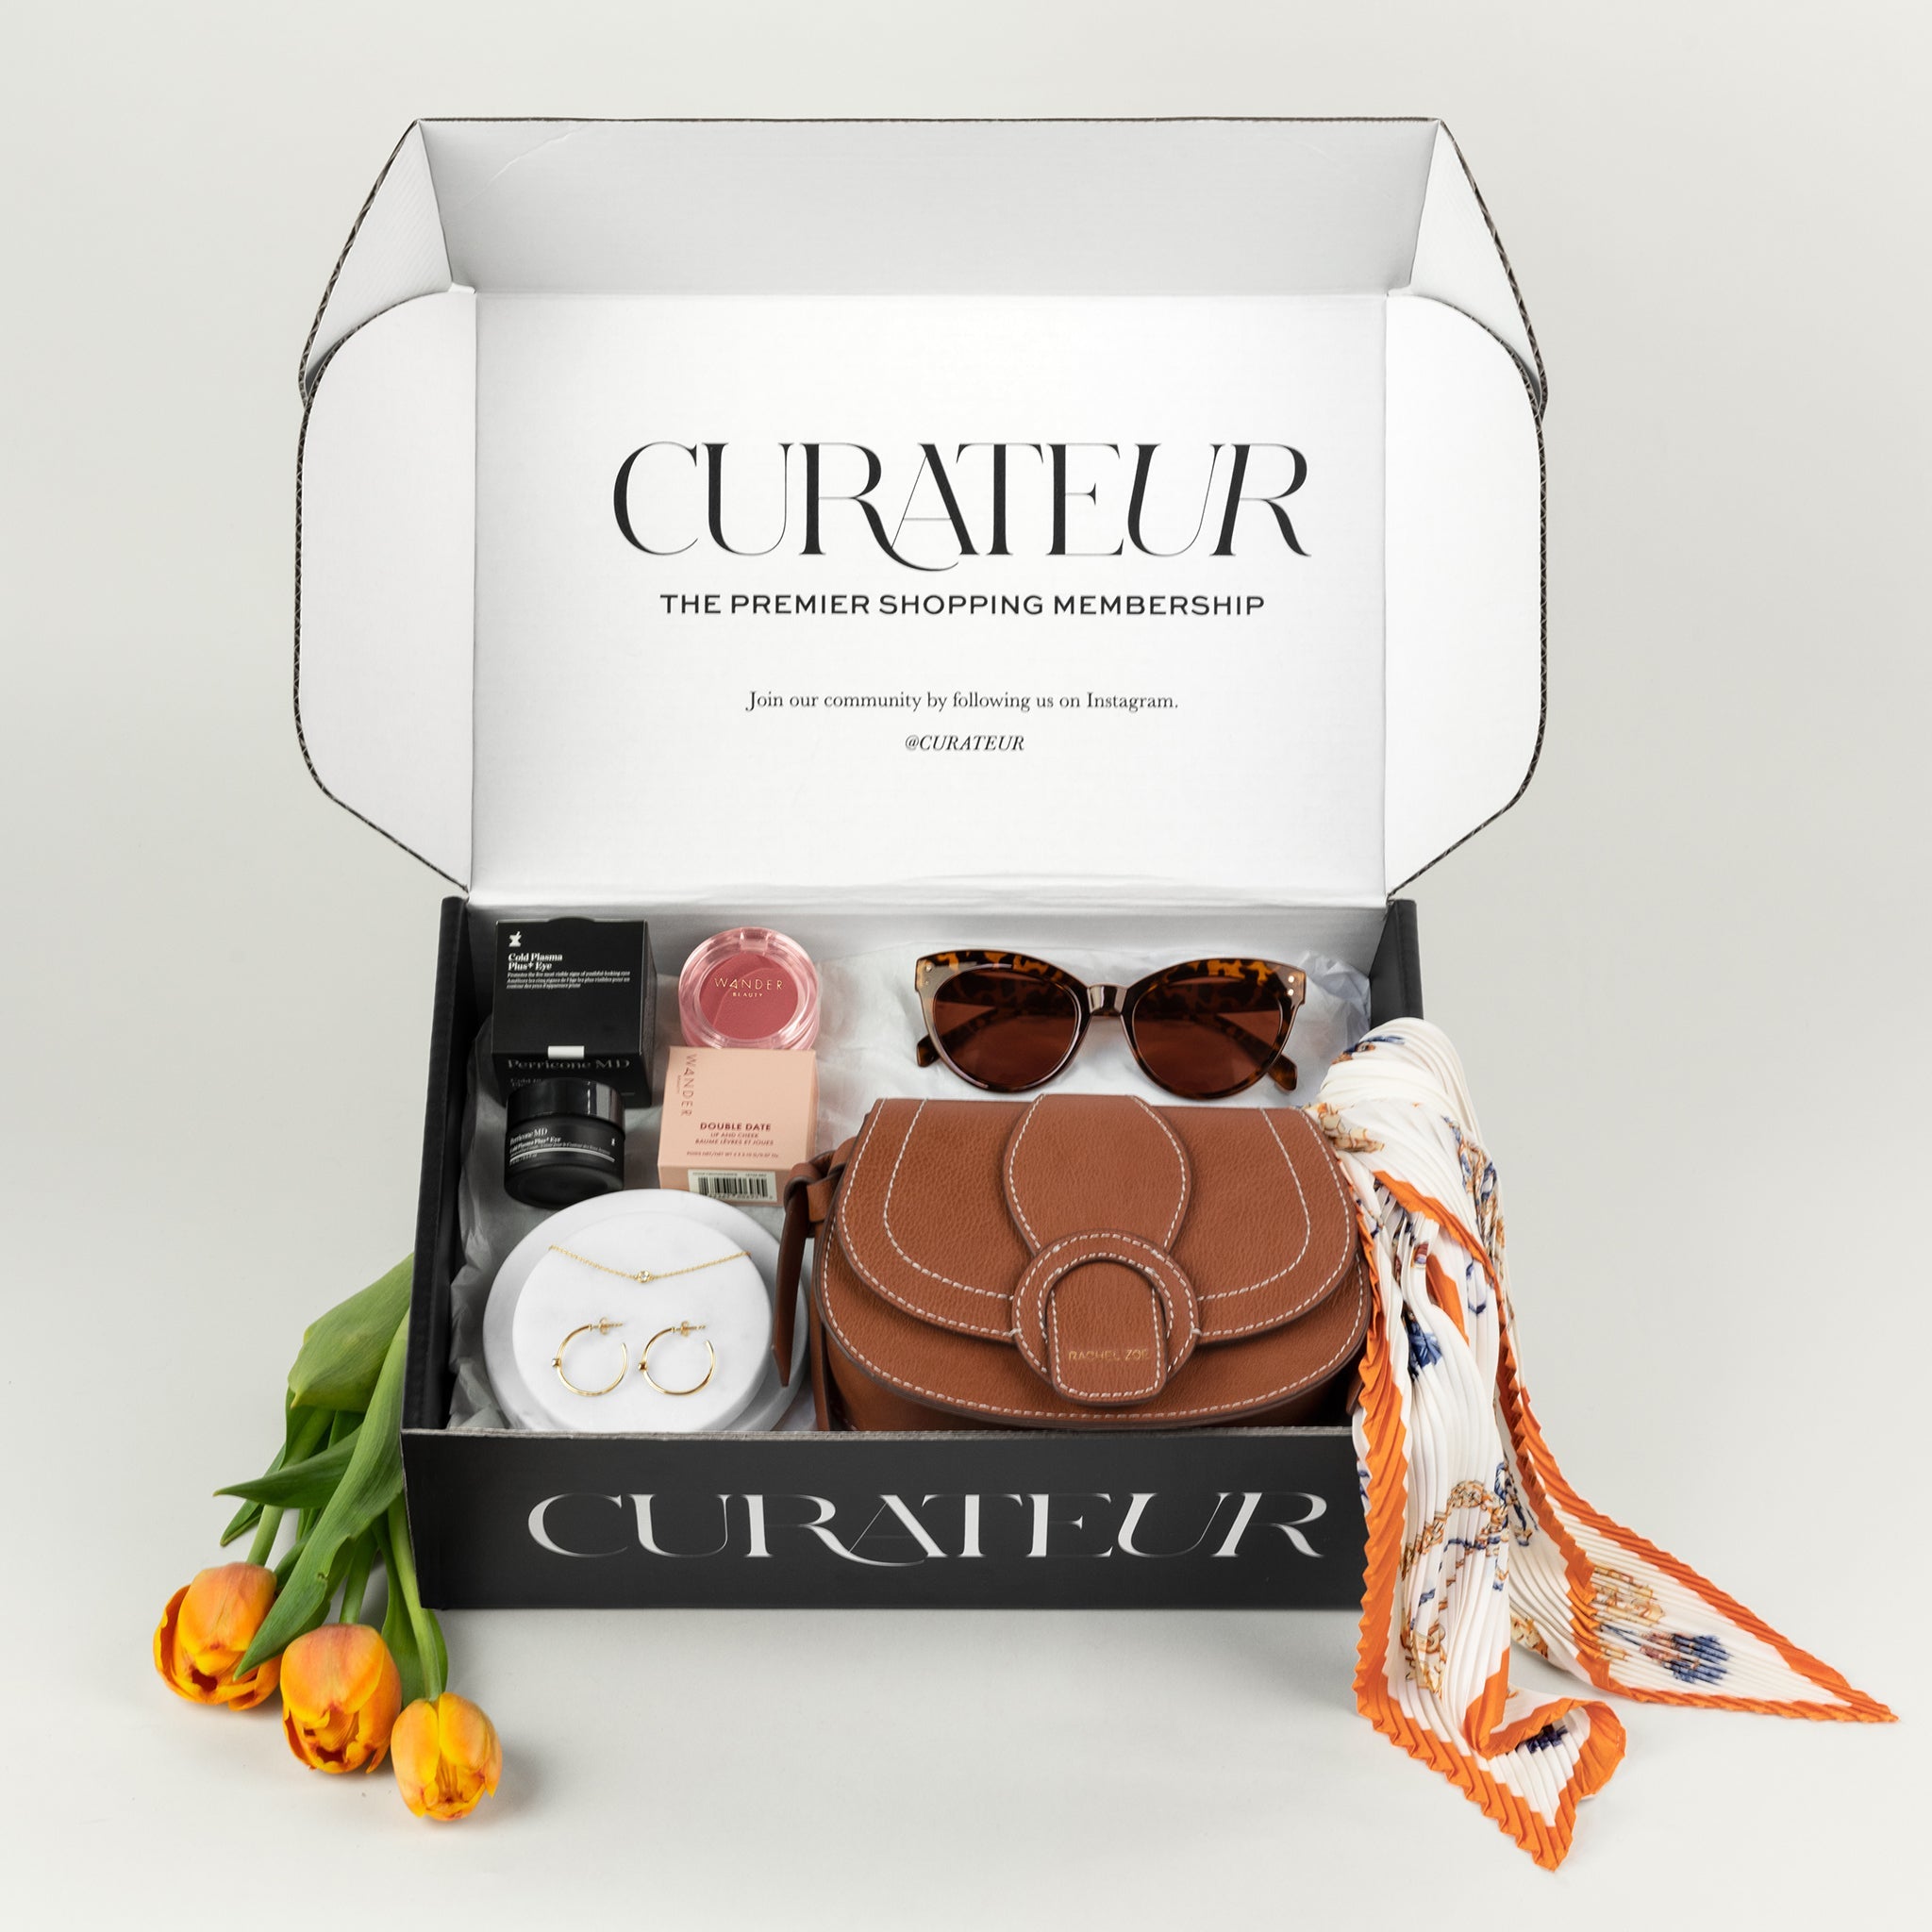 Rachel Zoe Curateur: Sign Up for a Free $500 Gift